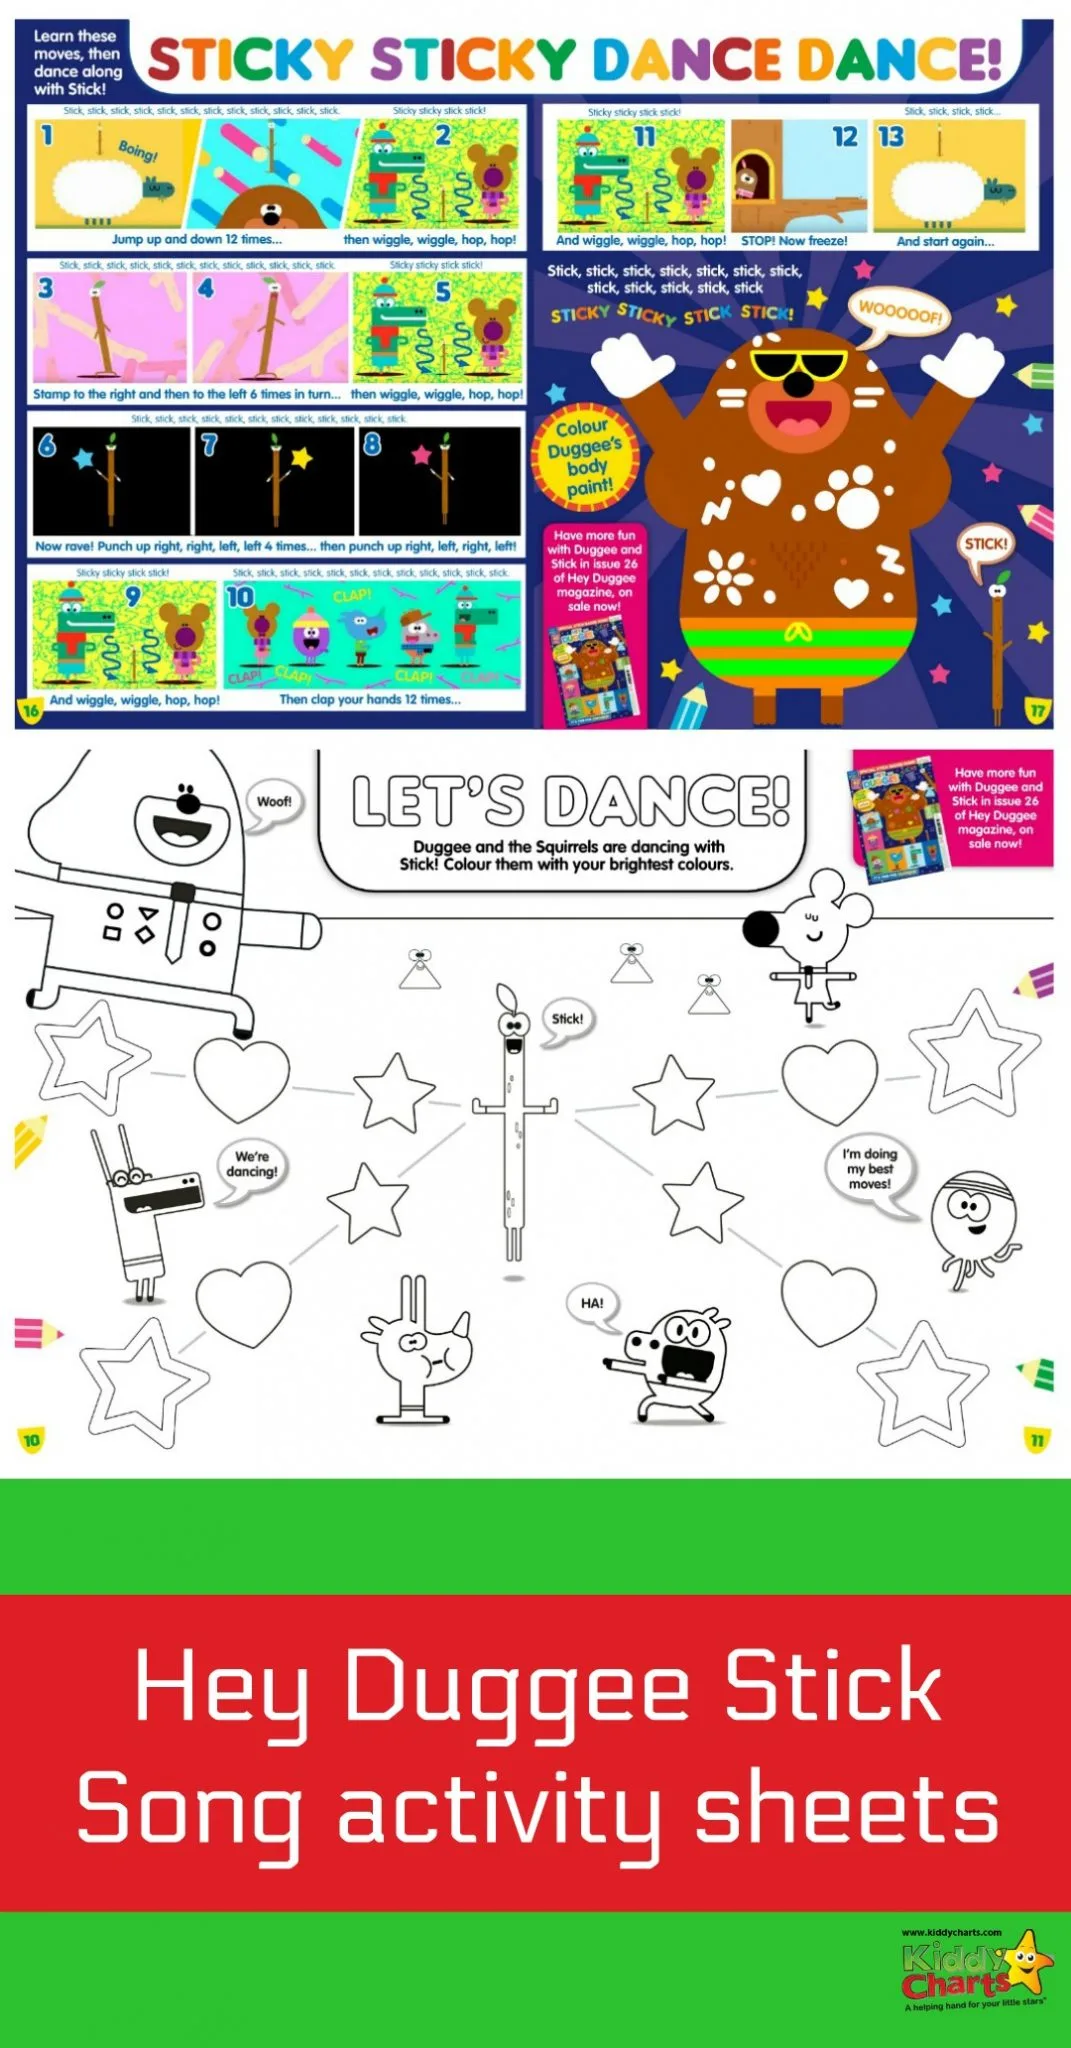 Check out the fabuloous Hey Duggee activity sheets we have from their Hey Duggee ‘Special Stick Badge Issue’ magazine which is out now. Learn the stick dance with ur kids! #kids #toddlers #dancing